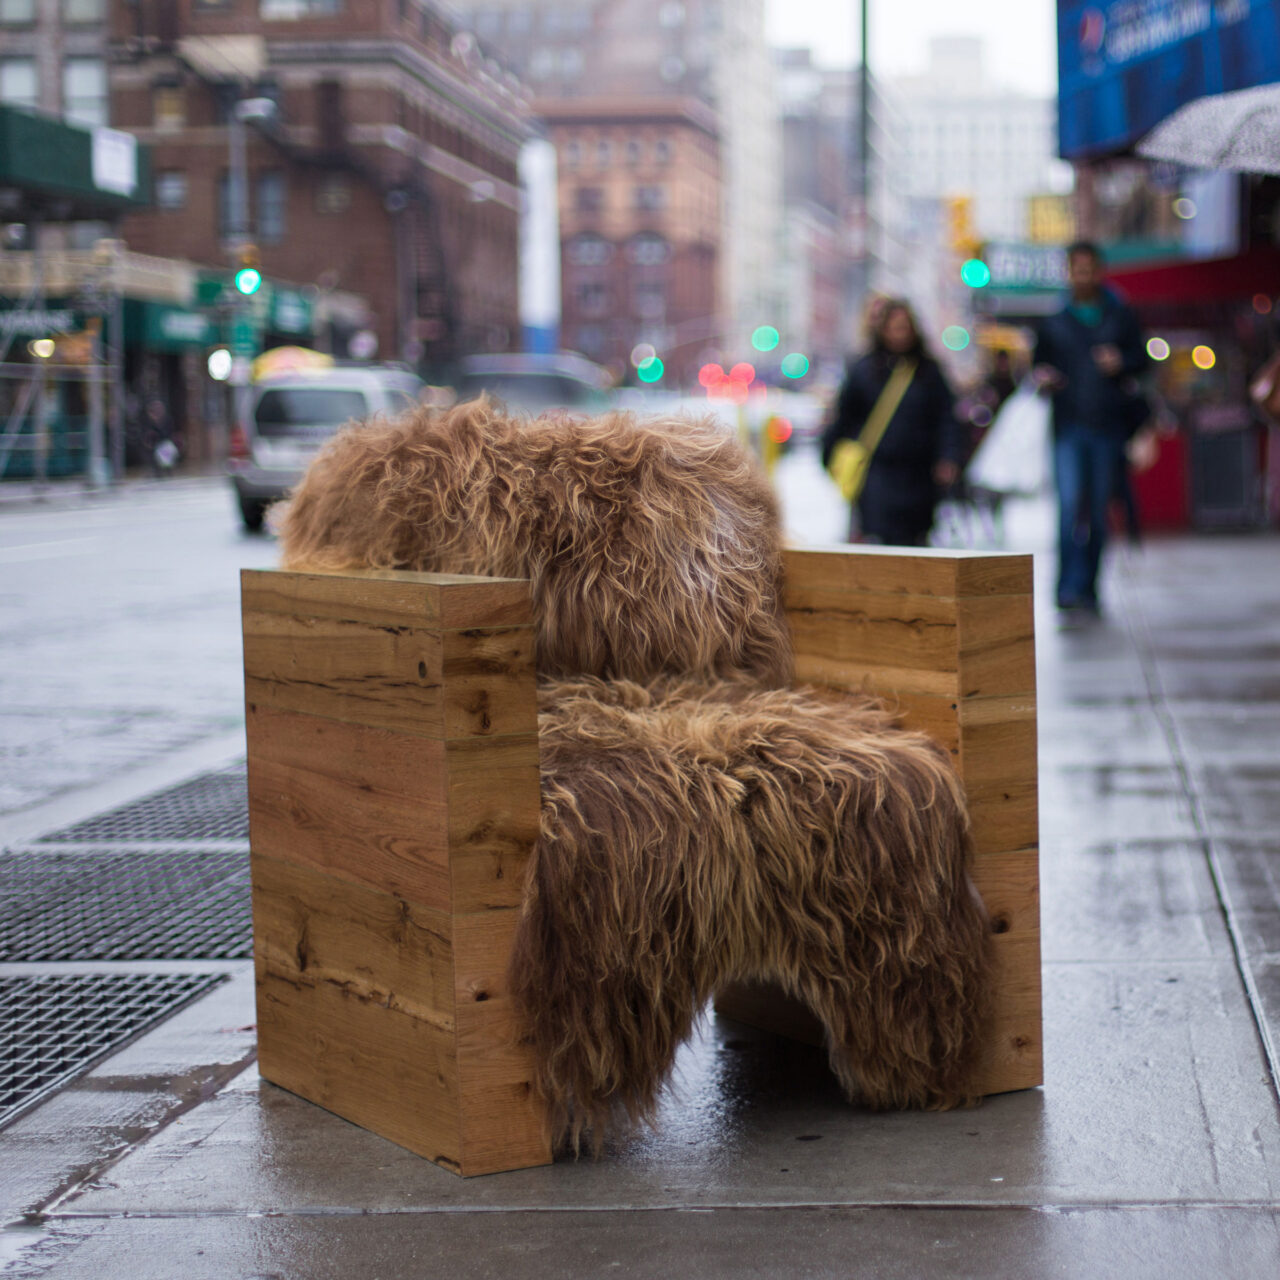 SENTIENT's Joojay luxury armchair placed outdoors, crafted from textured wood and covered with a thick, shaggy brown sheepskin, blending with the urban surroundings.